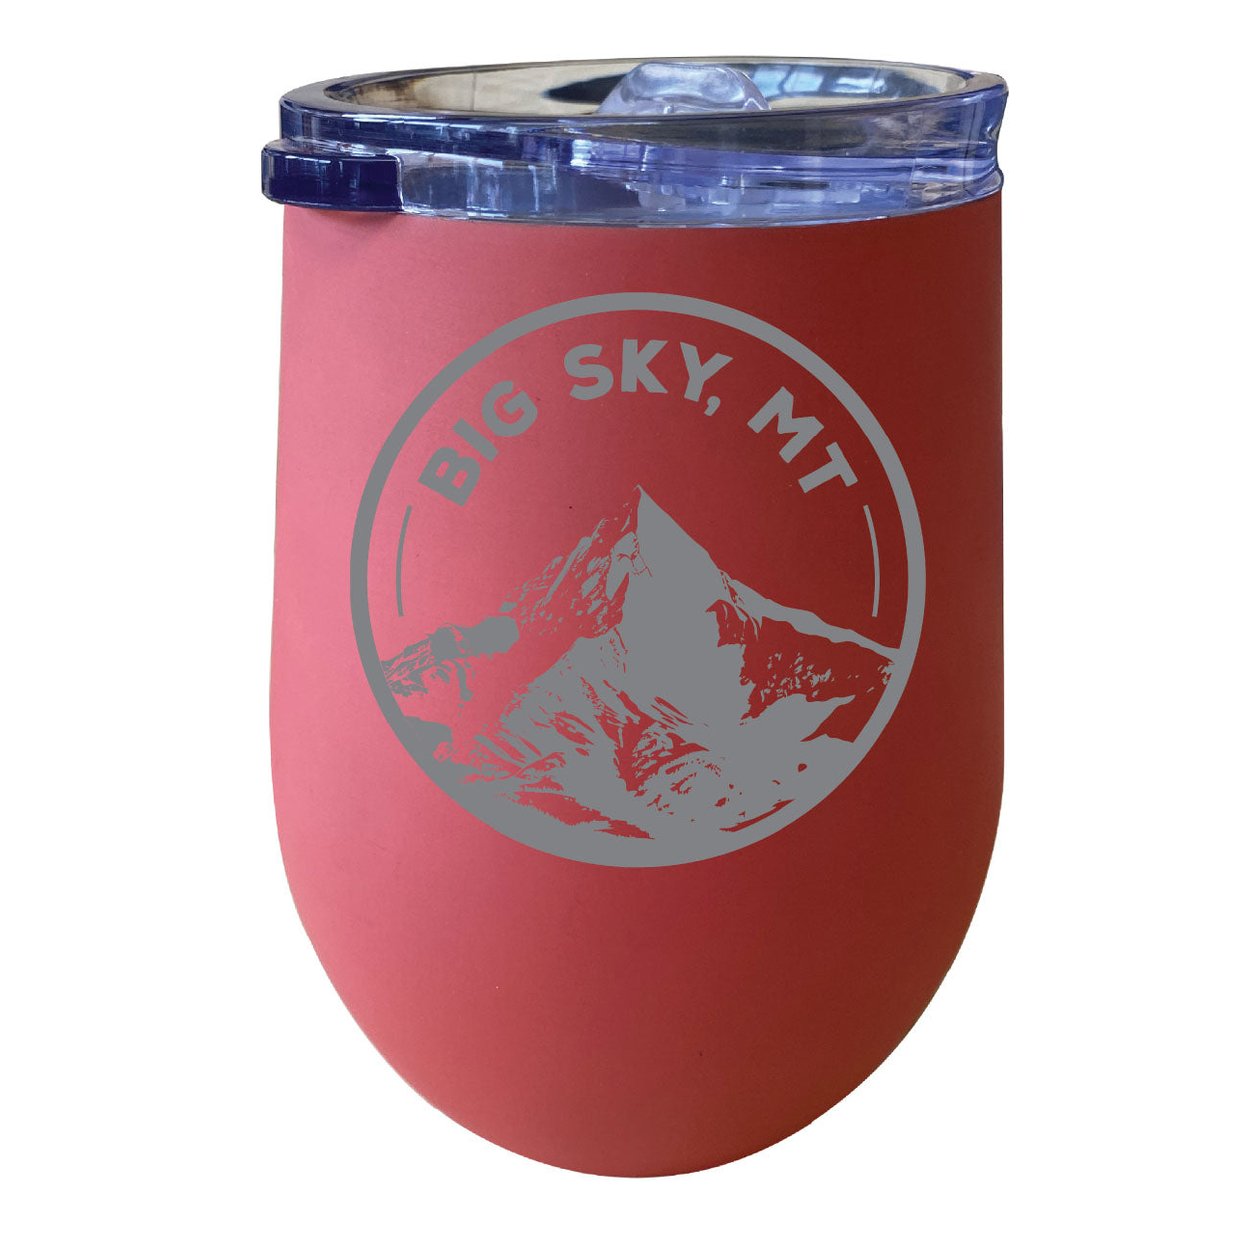 Big Sky Montana Souvenir 12 Oz Engraved Insulated Wine Stainless Steel Tumbler - Coral,,2-Pack